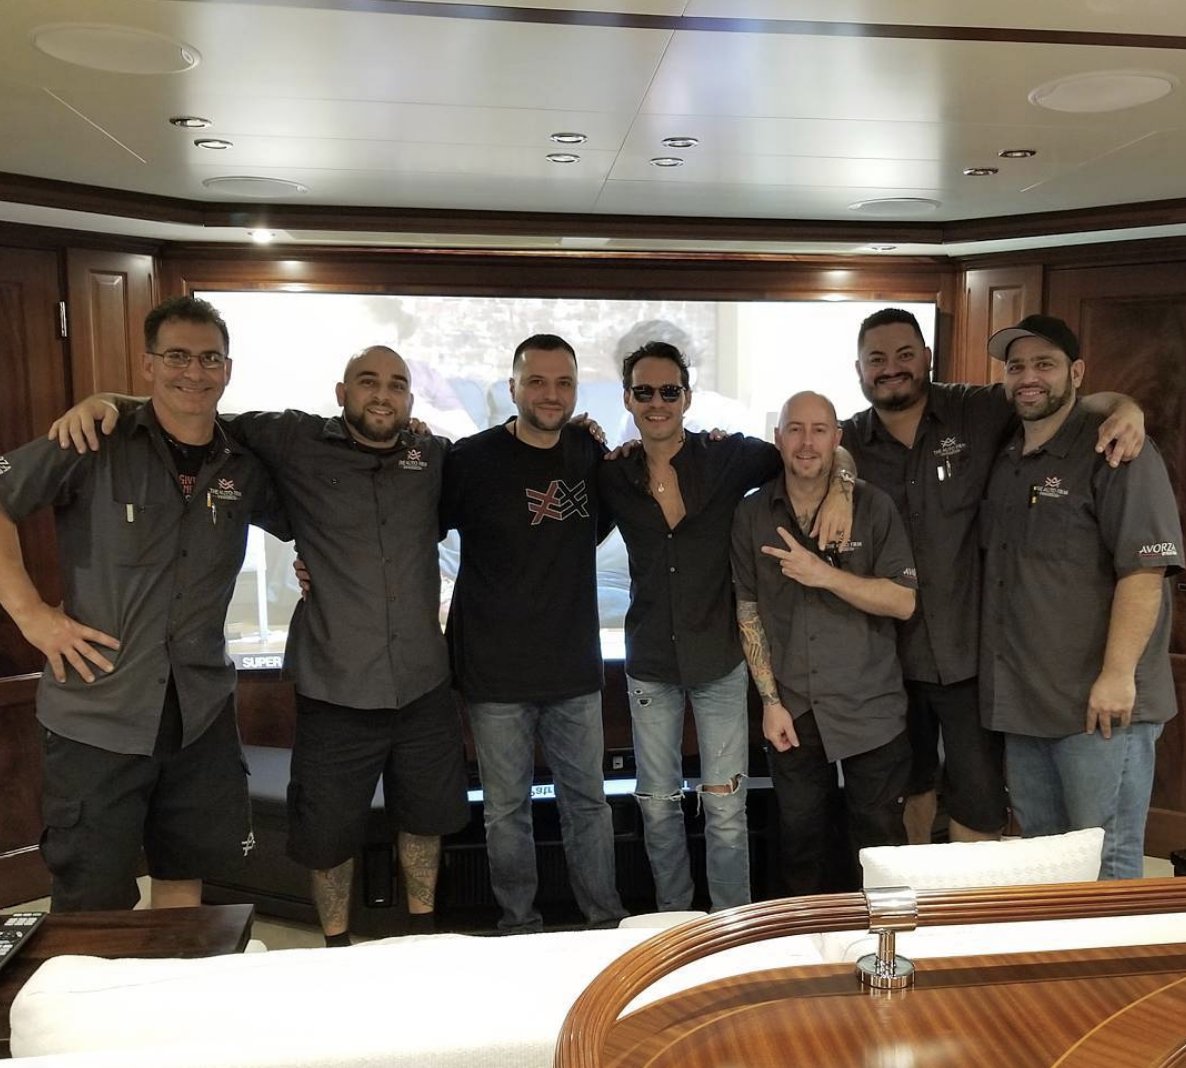 Thanks Alex Vega and @TheAutoFirm team for creating my new theater in my new yacht in time for the #SuperBowl. https://t.co/NFkhm0GBuB